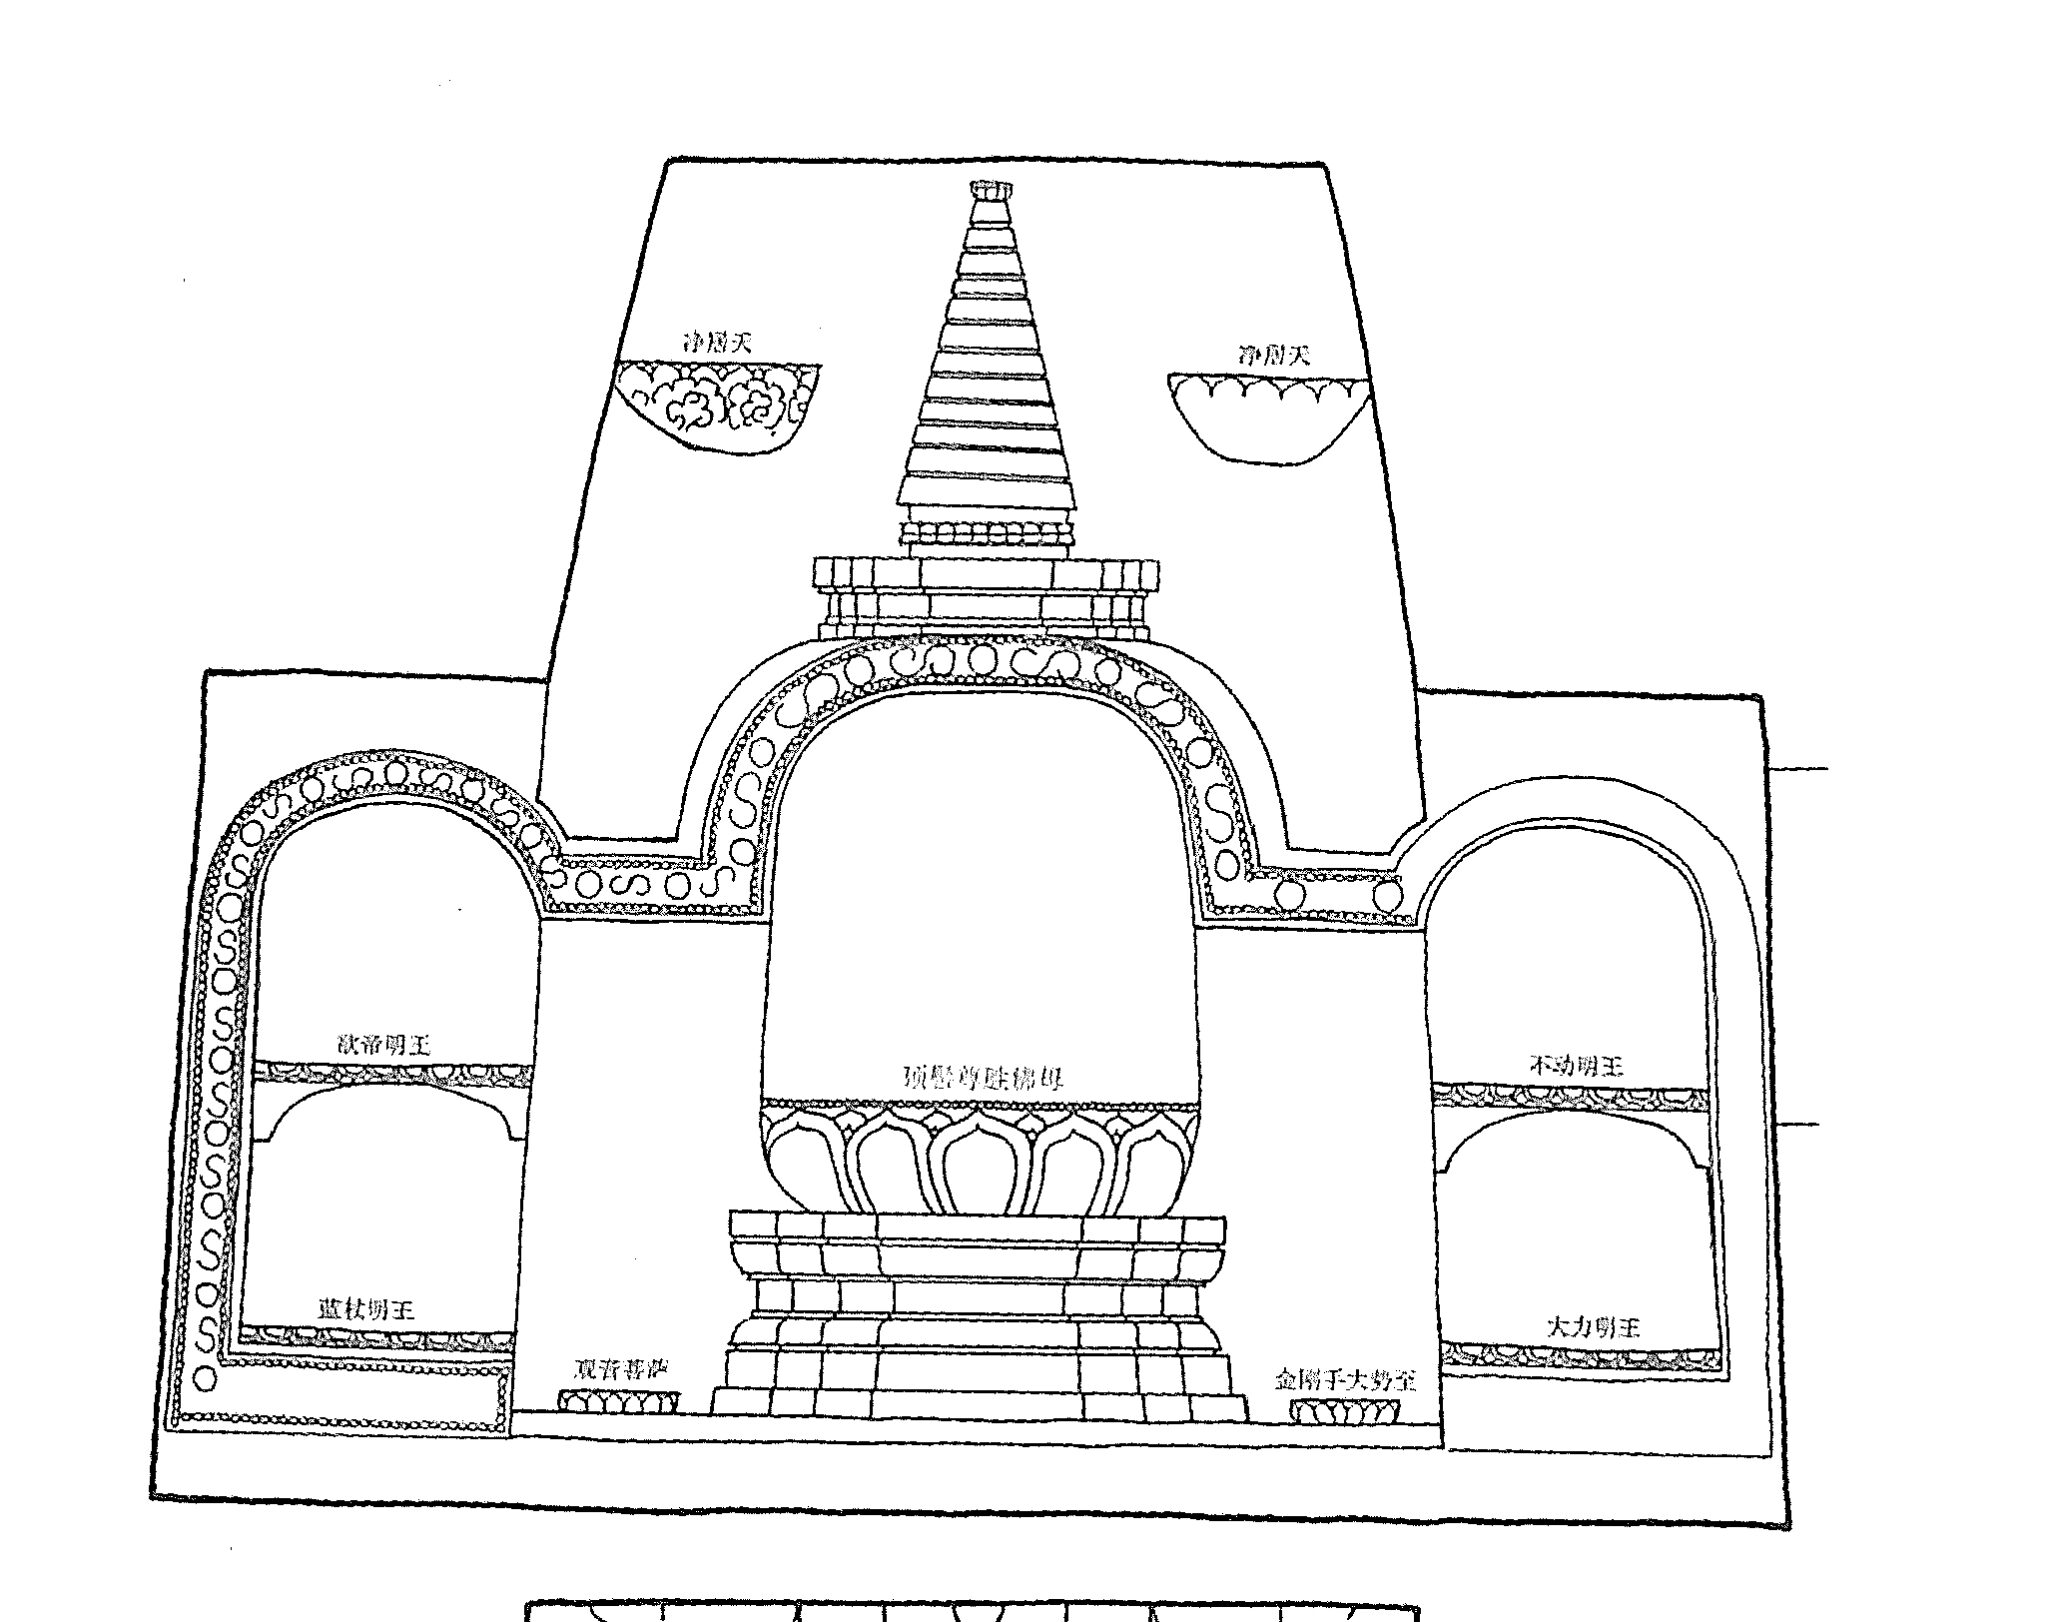 Diagram depicting stupa-shaped niche flanked by four smaller niches; niches labeled with Chinese text